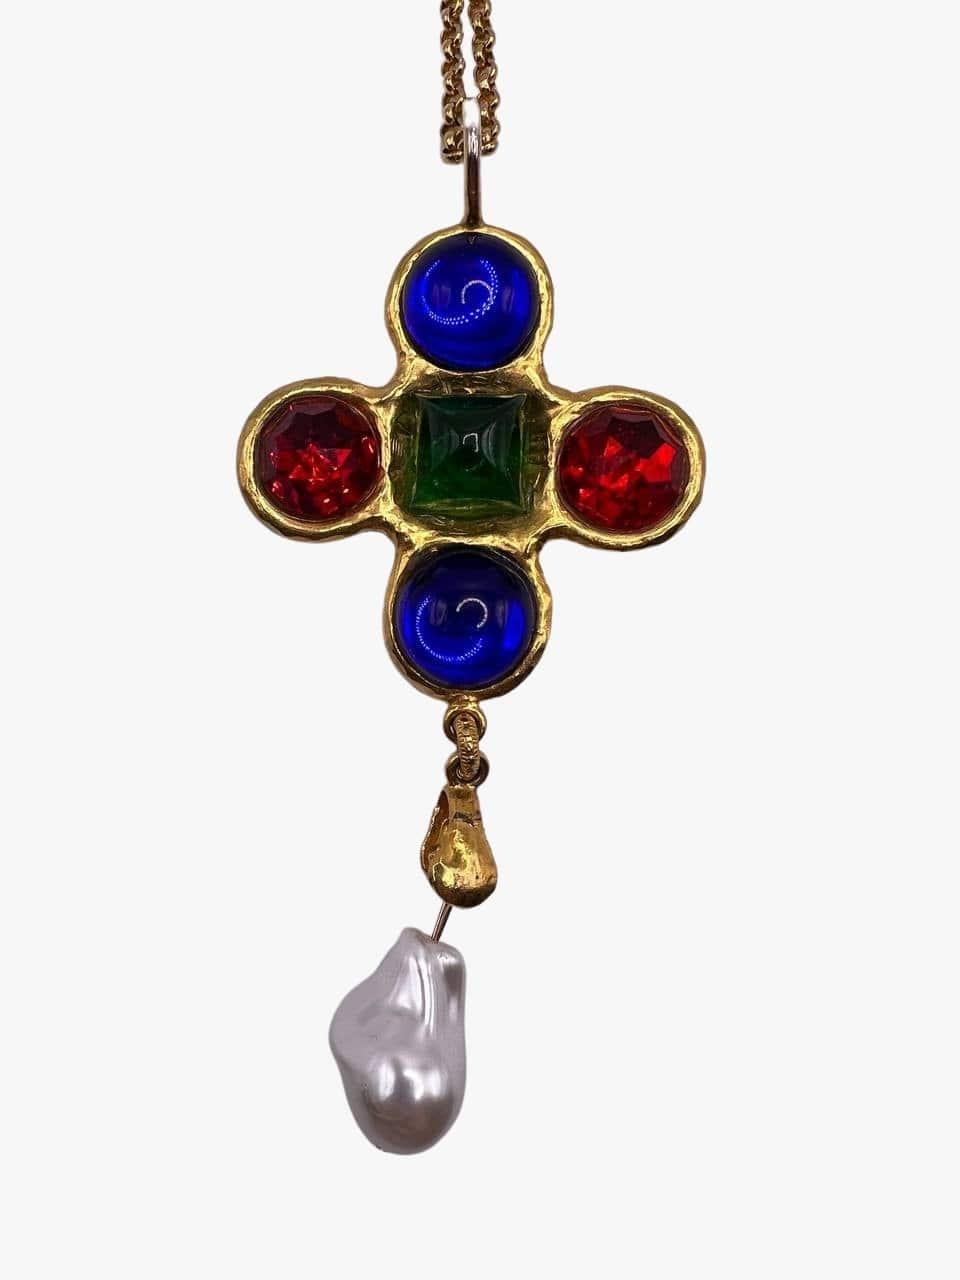 Vintage Byzantine style Yves Saint Laurent cross pendant with cabochons, 1980s 1